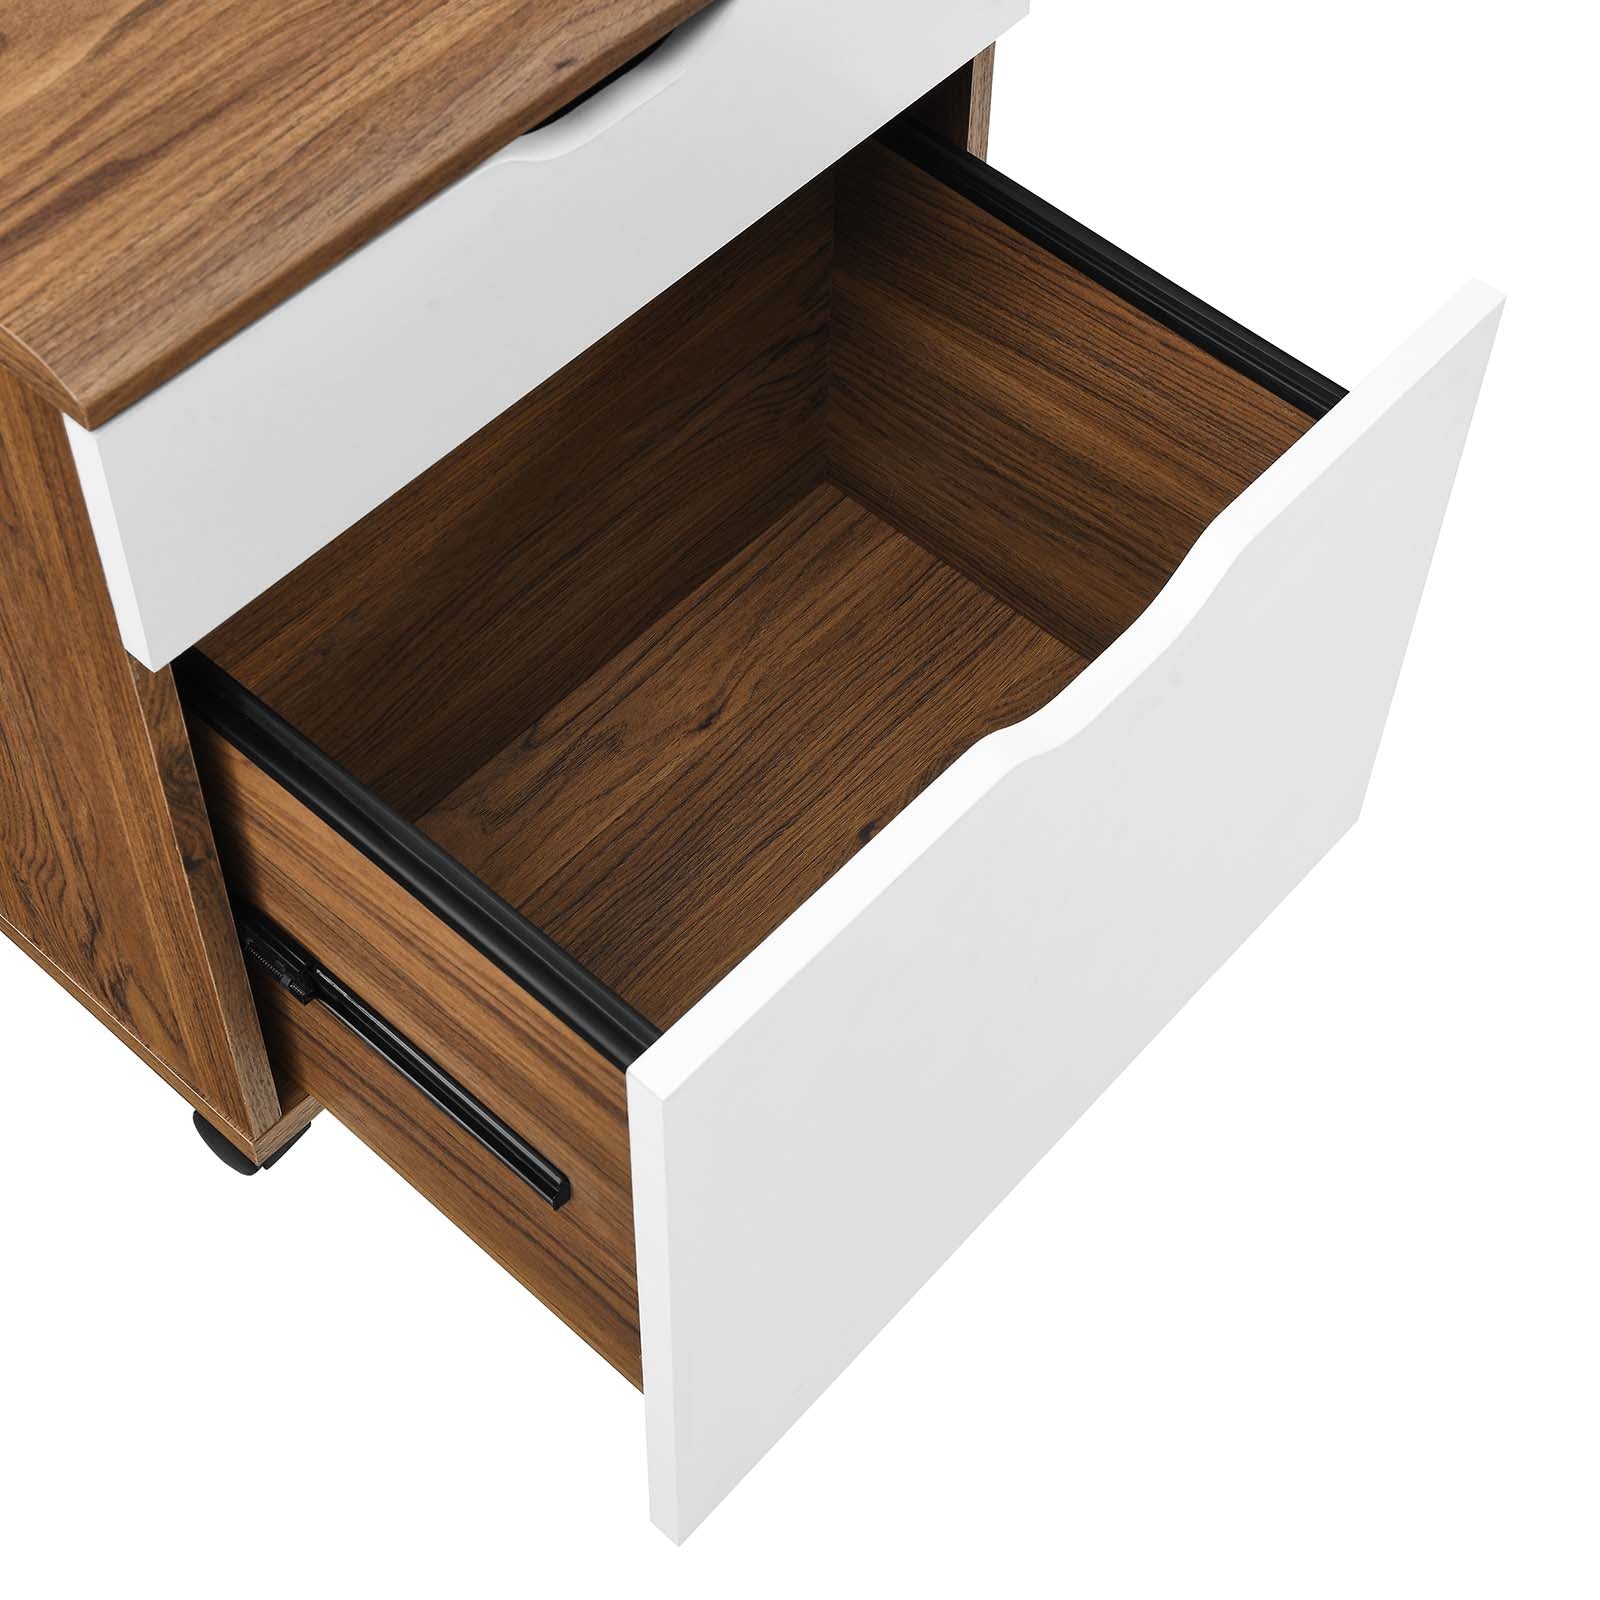 Envision Wood File Cabinet - East Shore Modern Home Furnishings